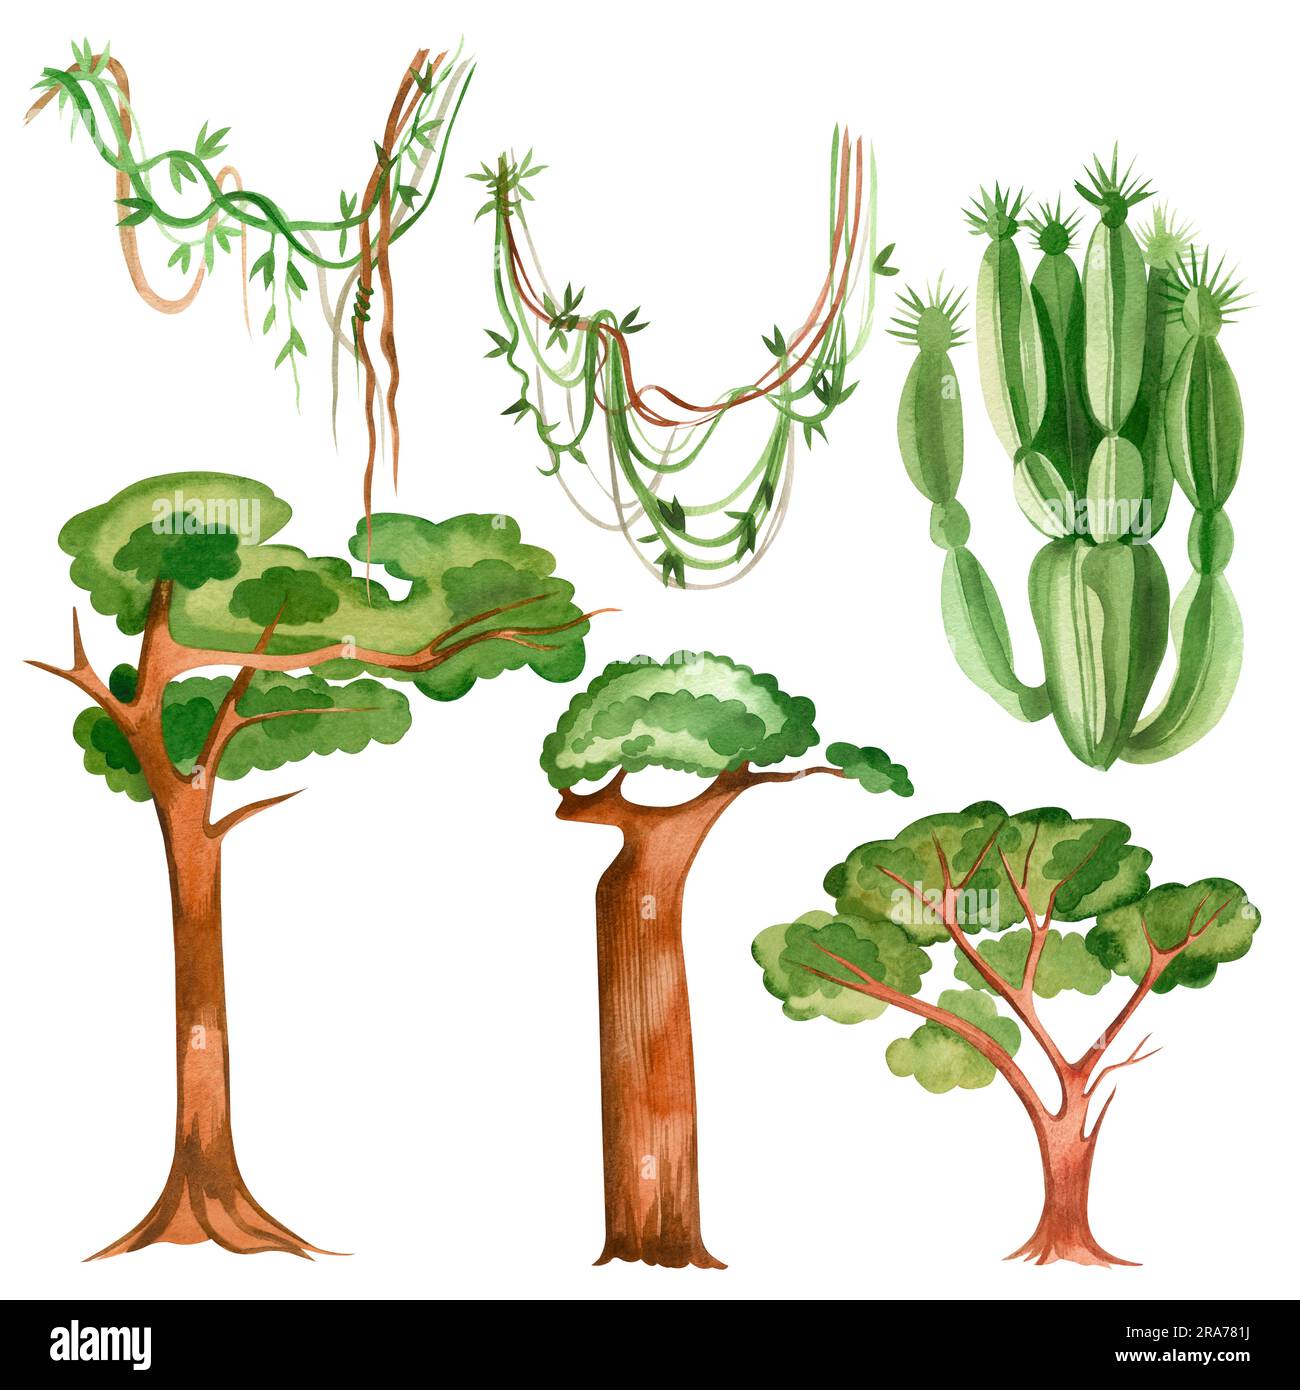 Set of trees, vines and cactus on a white background. All elements are hand-drawn in watercolor on a white background. for printing on textiles, paper Stock Photo